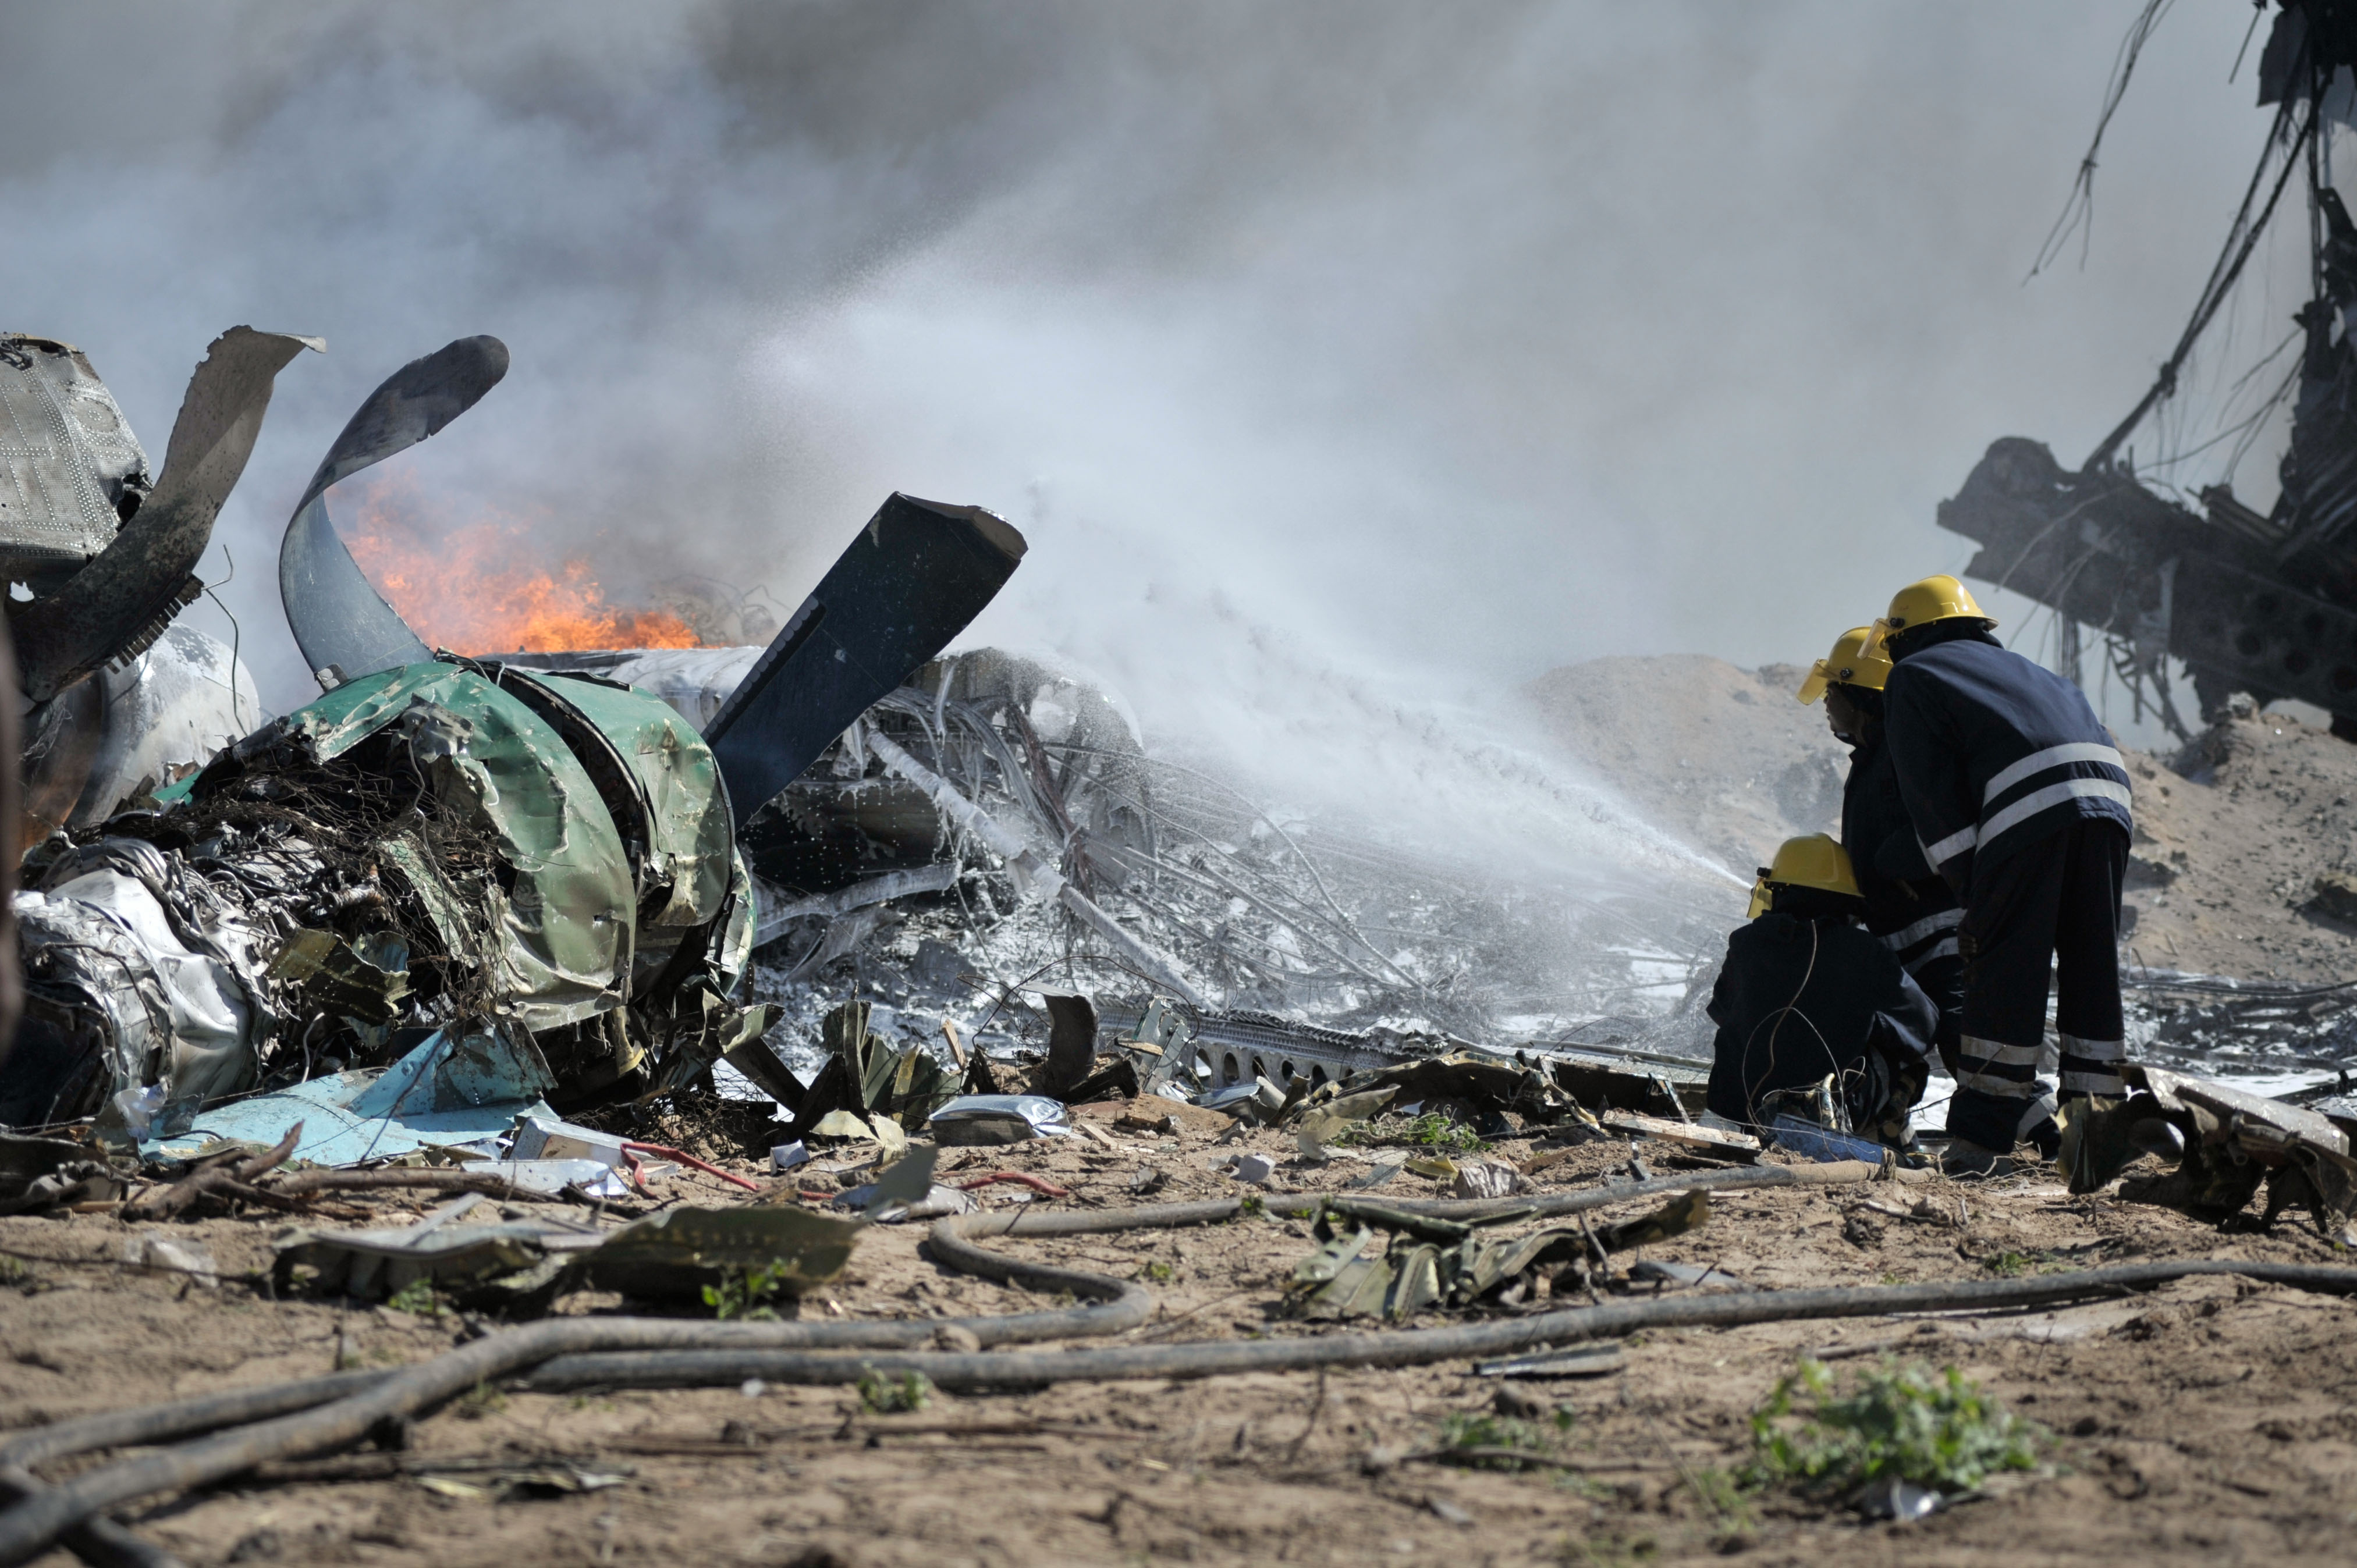 Iran crash is the first fatal incident for Ukrainian airline